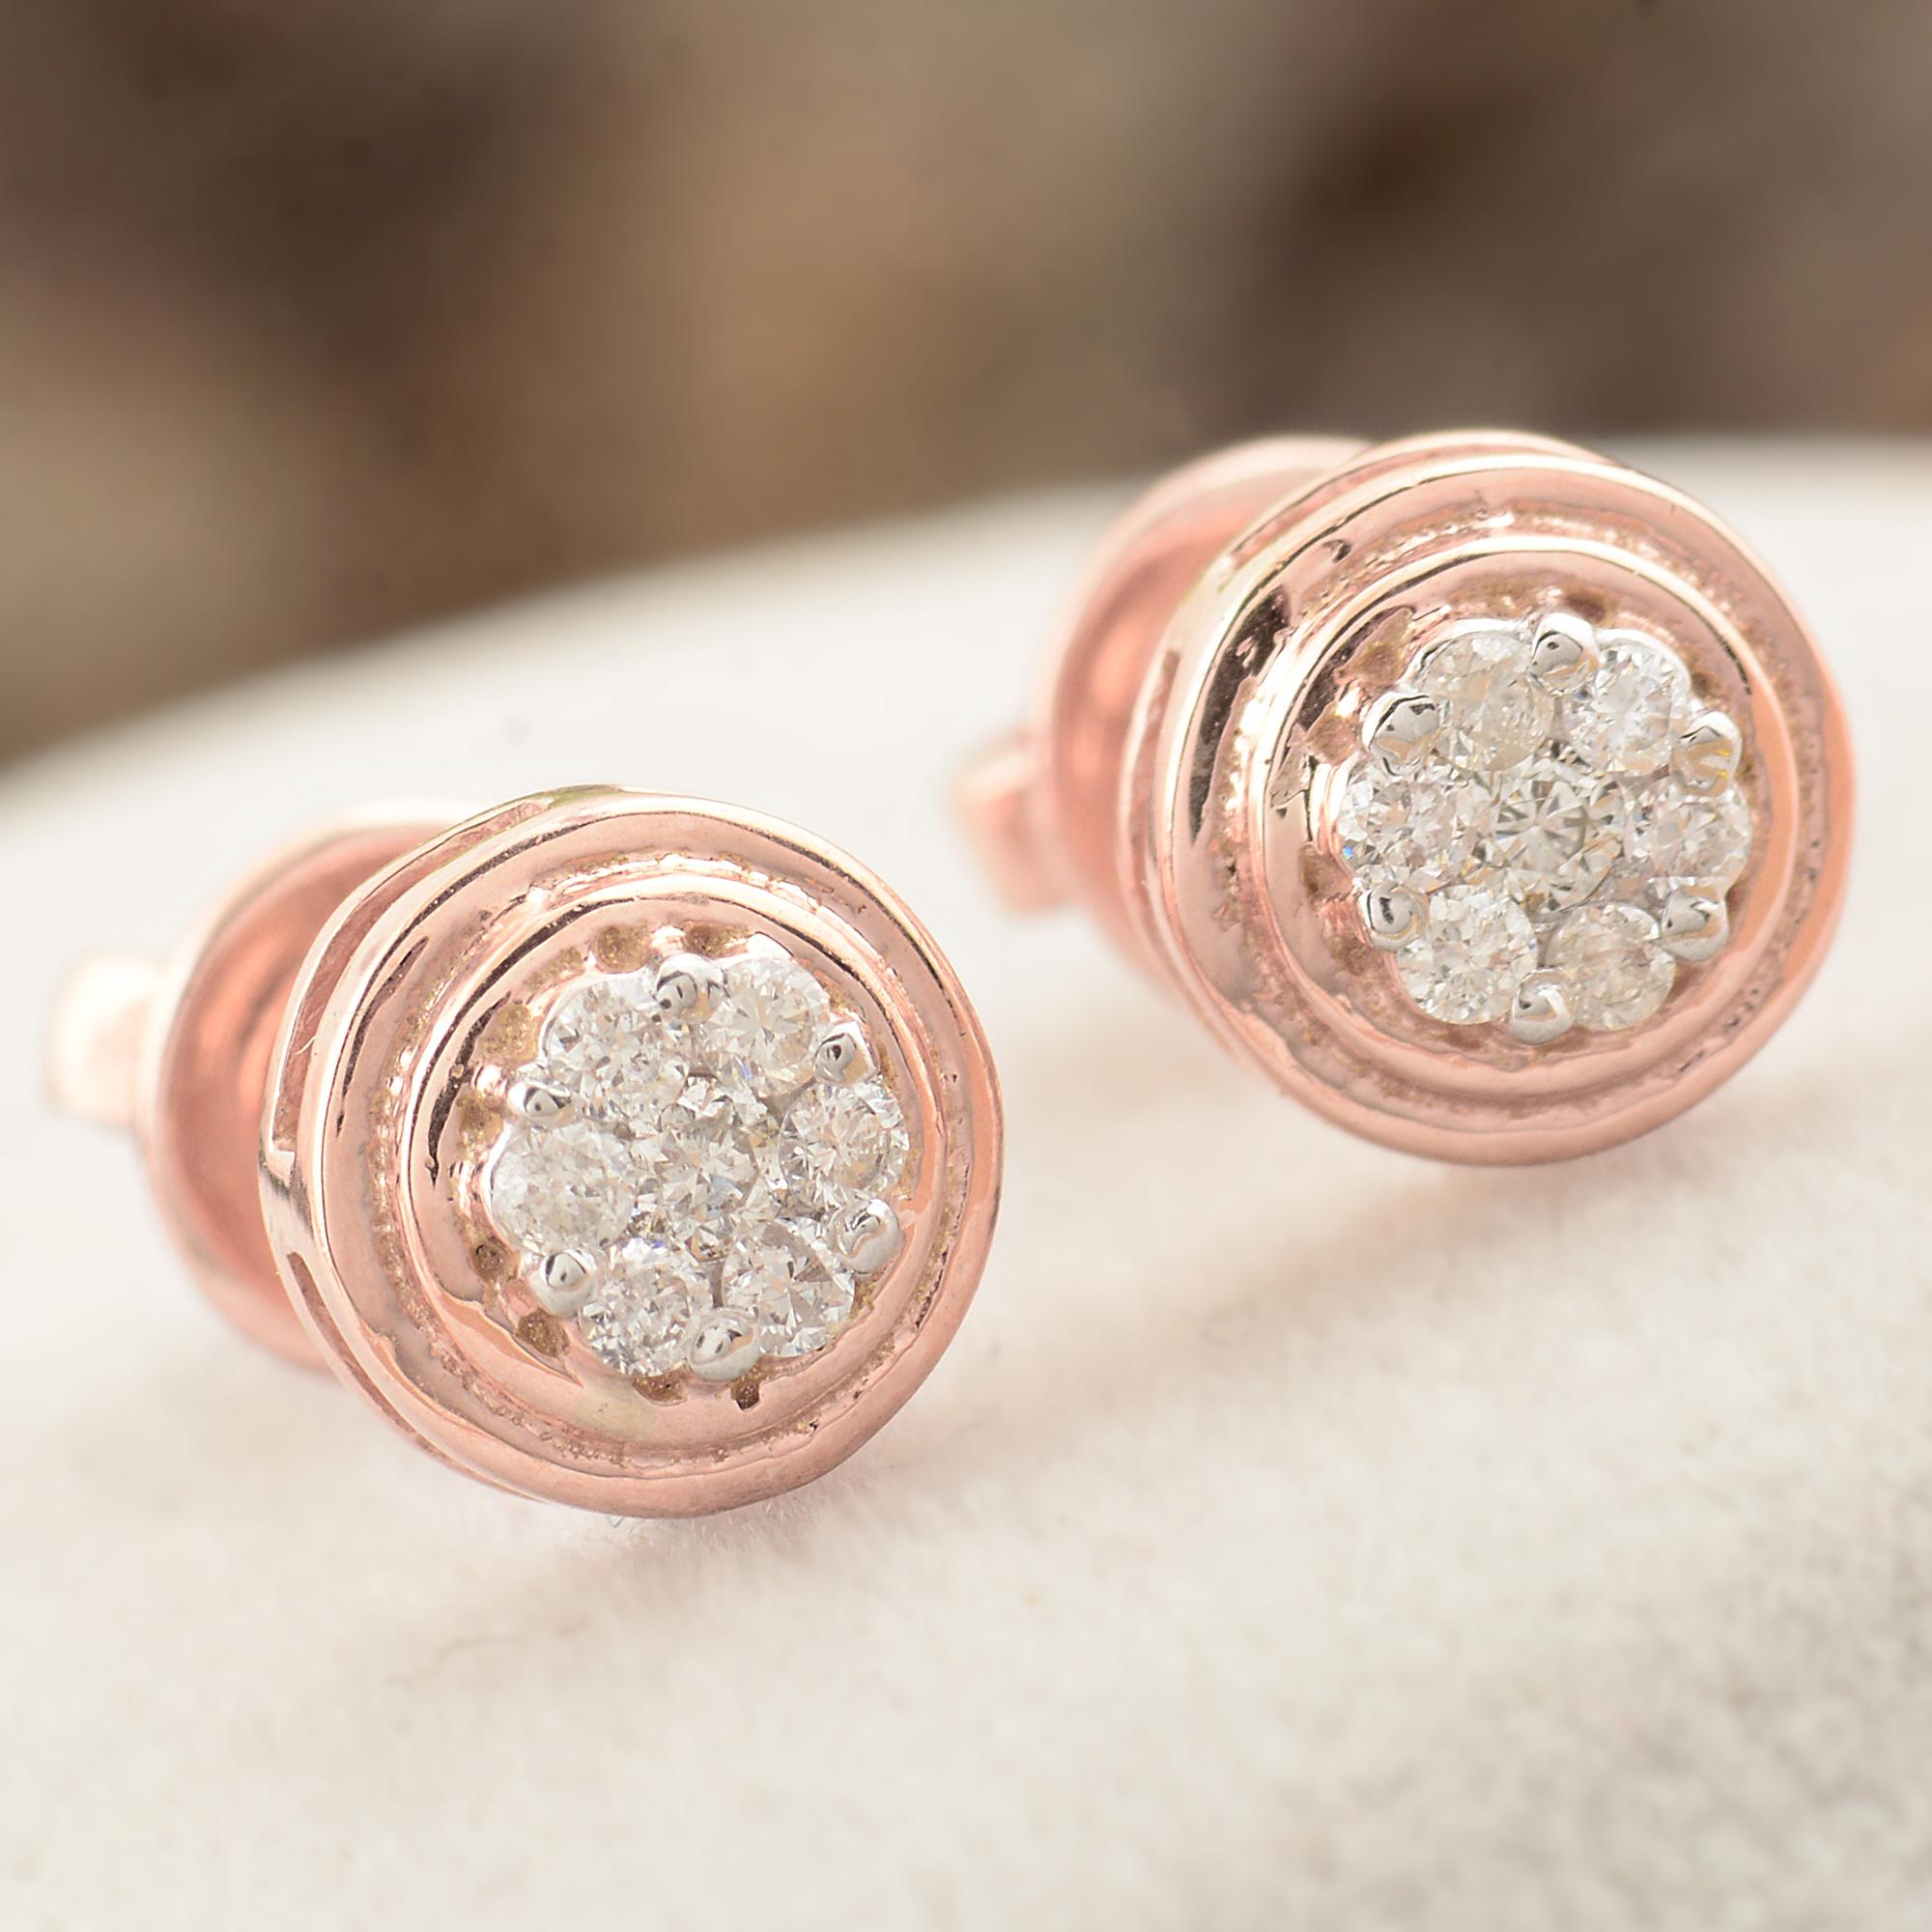 Modern 0.12 Ct SI Clarity HI Color Round Diamond Stud Earrings 10 Kt Rose Gold Jewelry For Sale